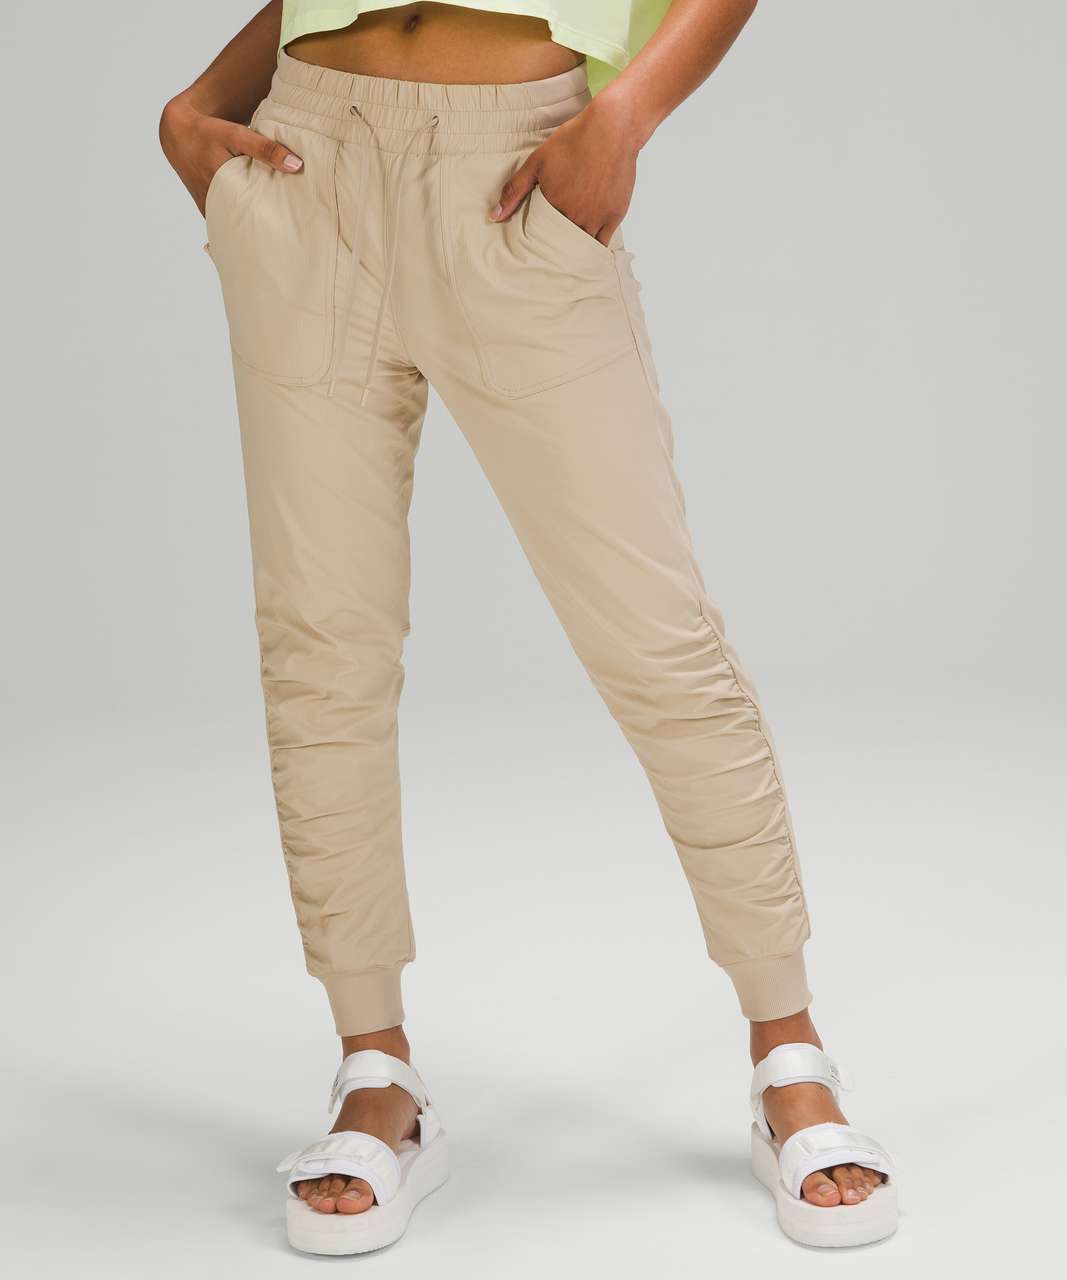 Lululemon Beyond the Studio 7/8 Jogger - Trench (First Release